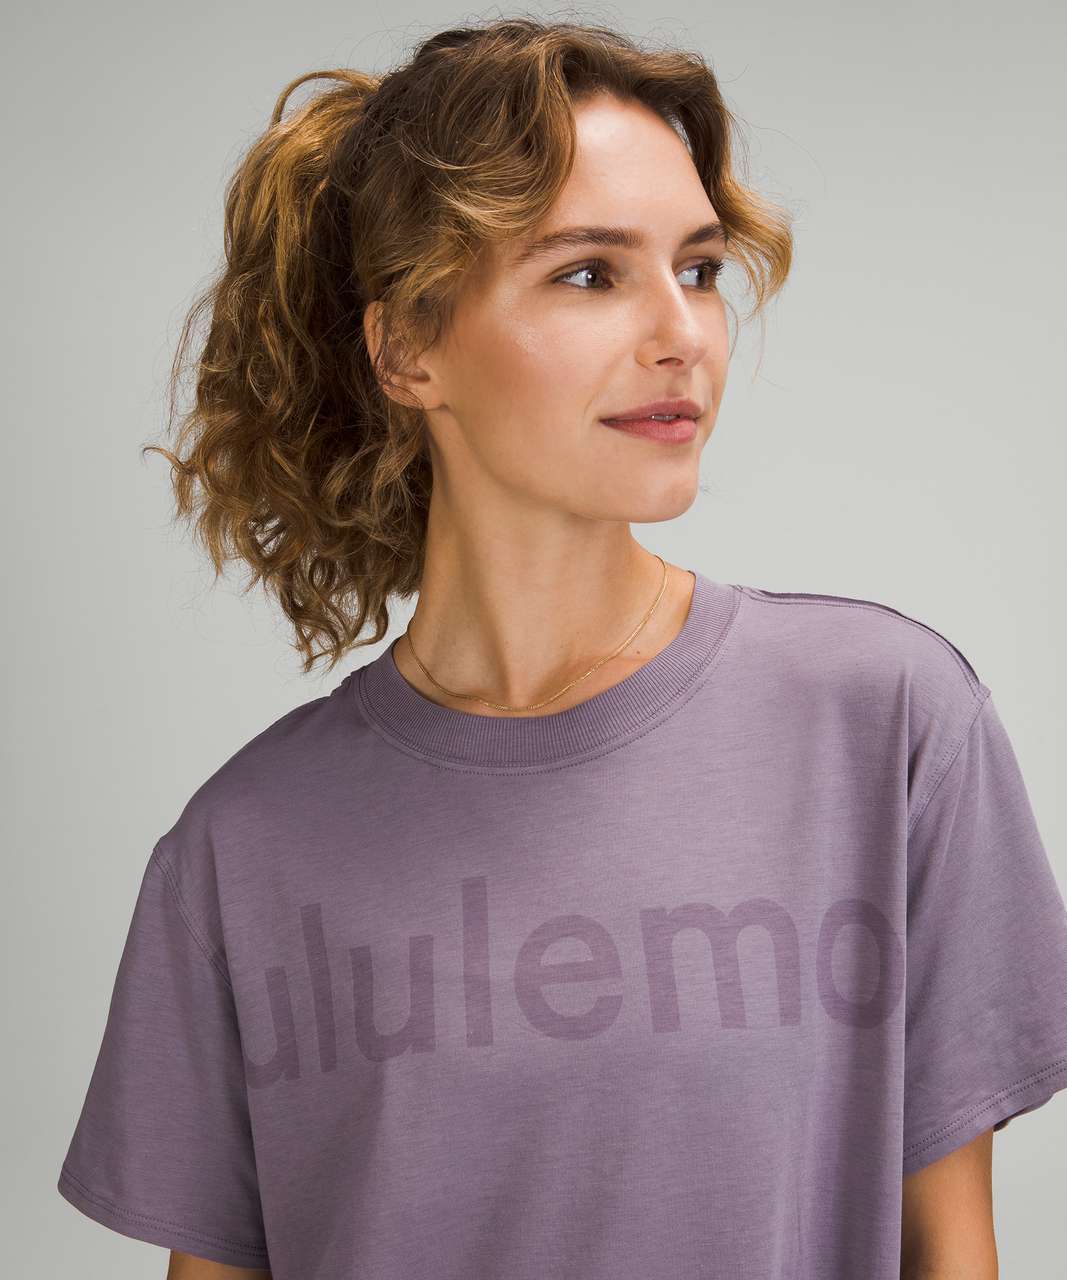 Lululemon All Yours Tee *Graphic - Dusky Lavender